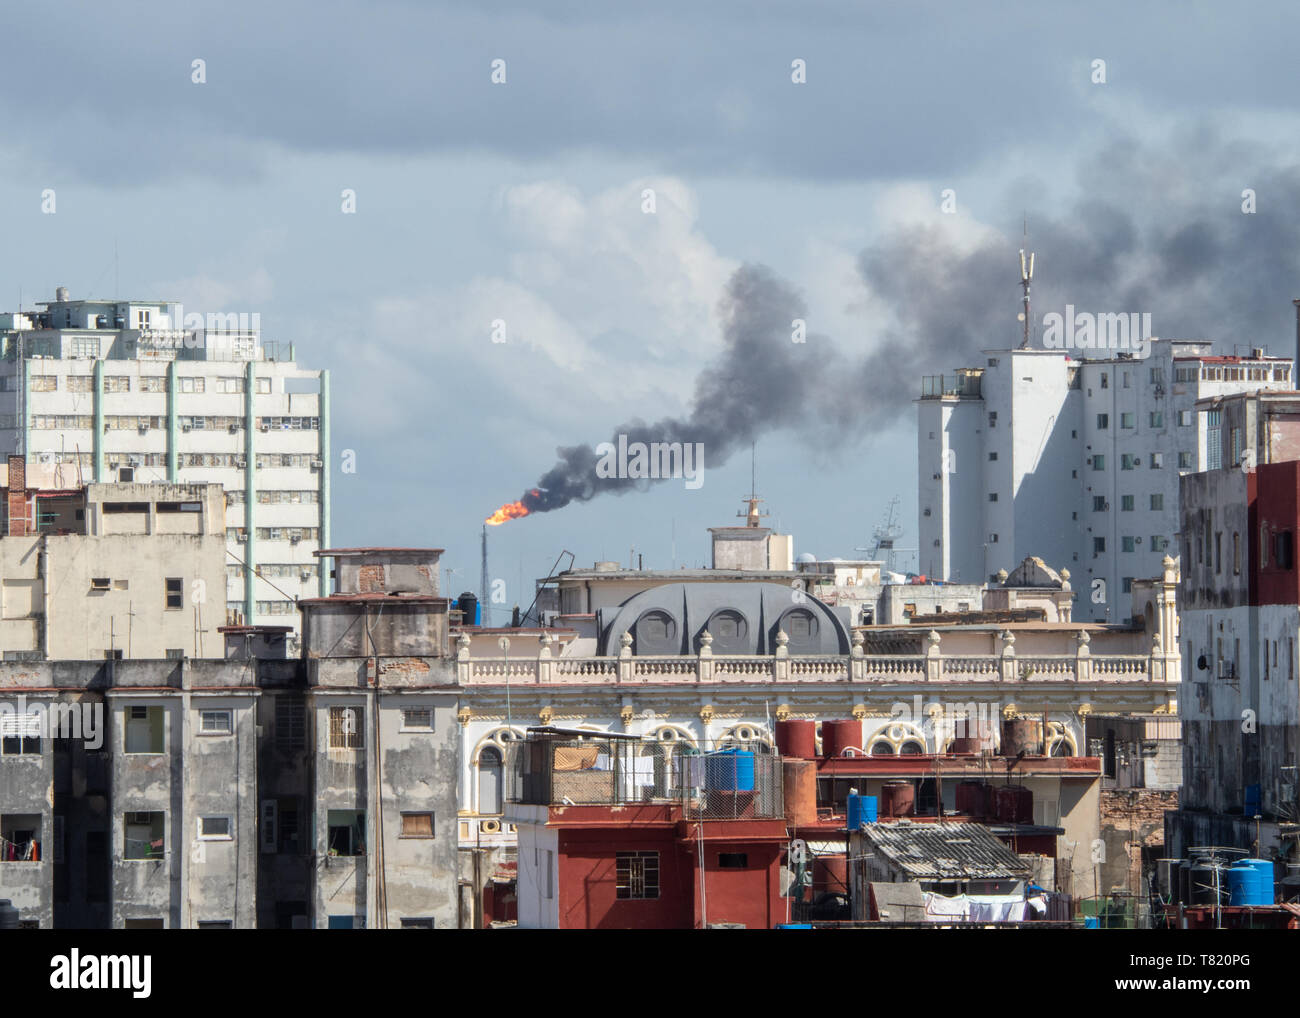 View over rooftops in Old Havana, with oil refinery flame, tower and smoke pollution Stock Photo